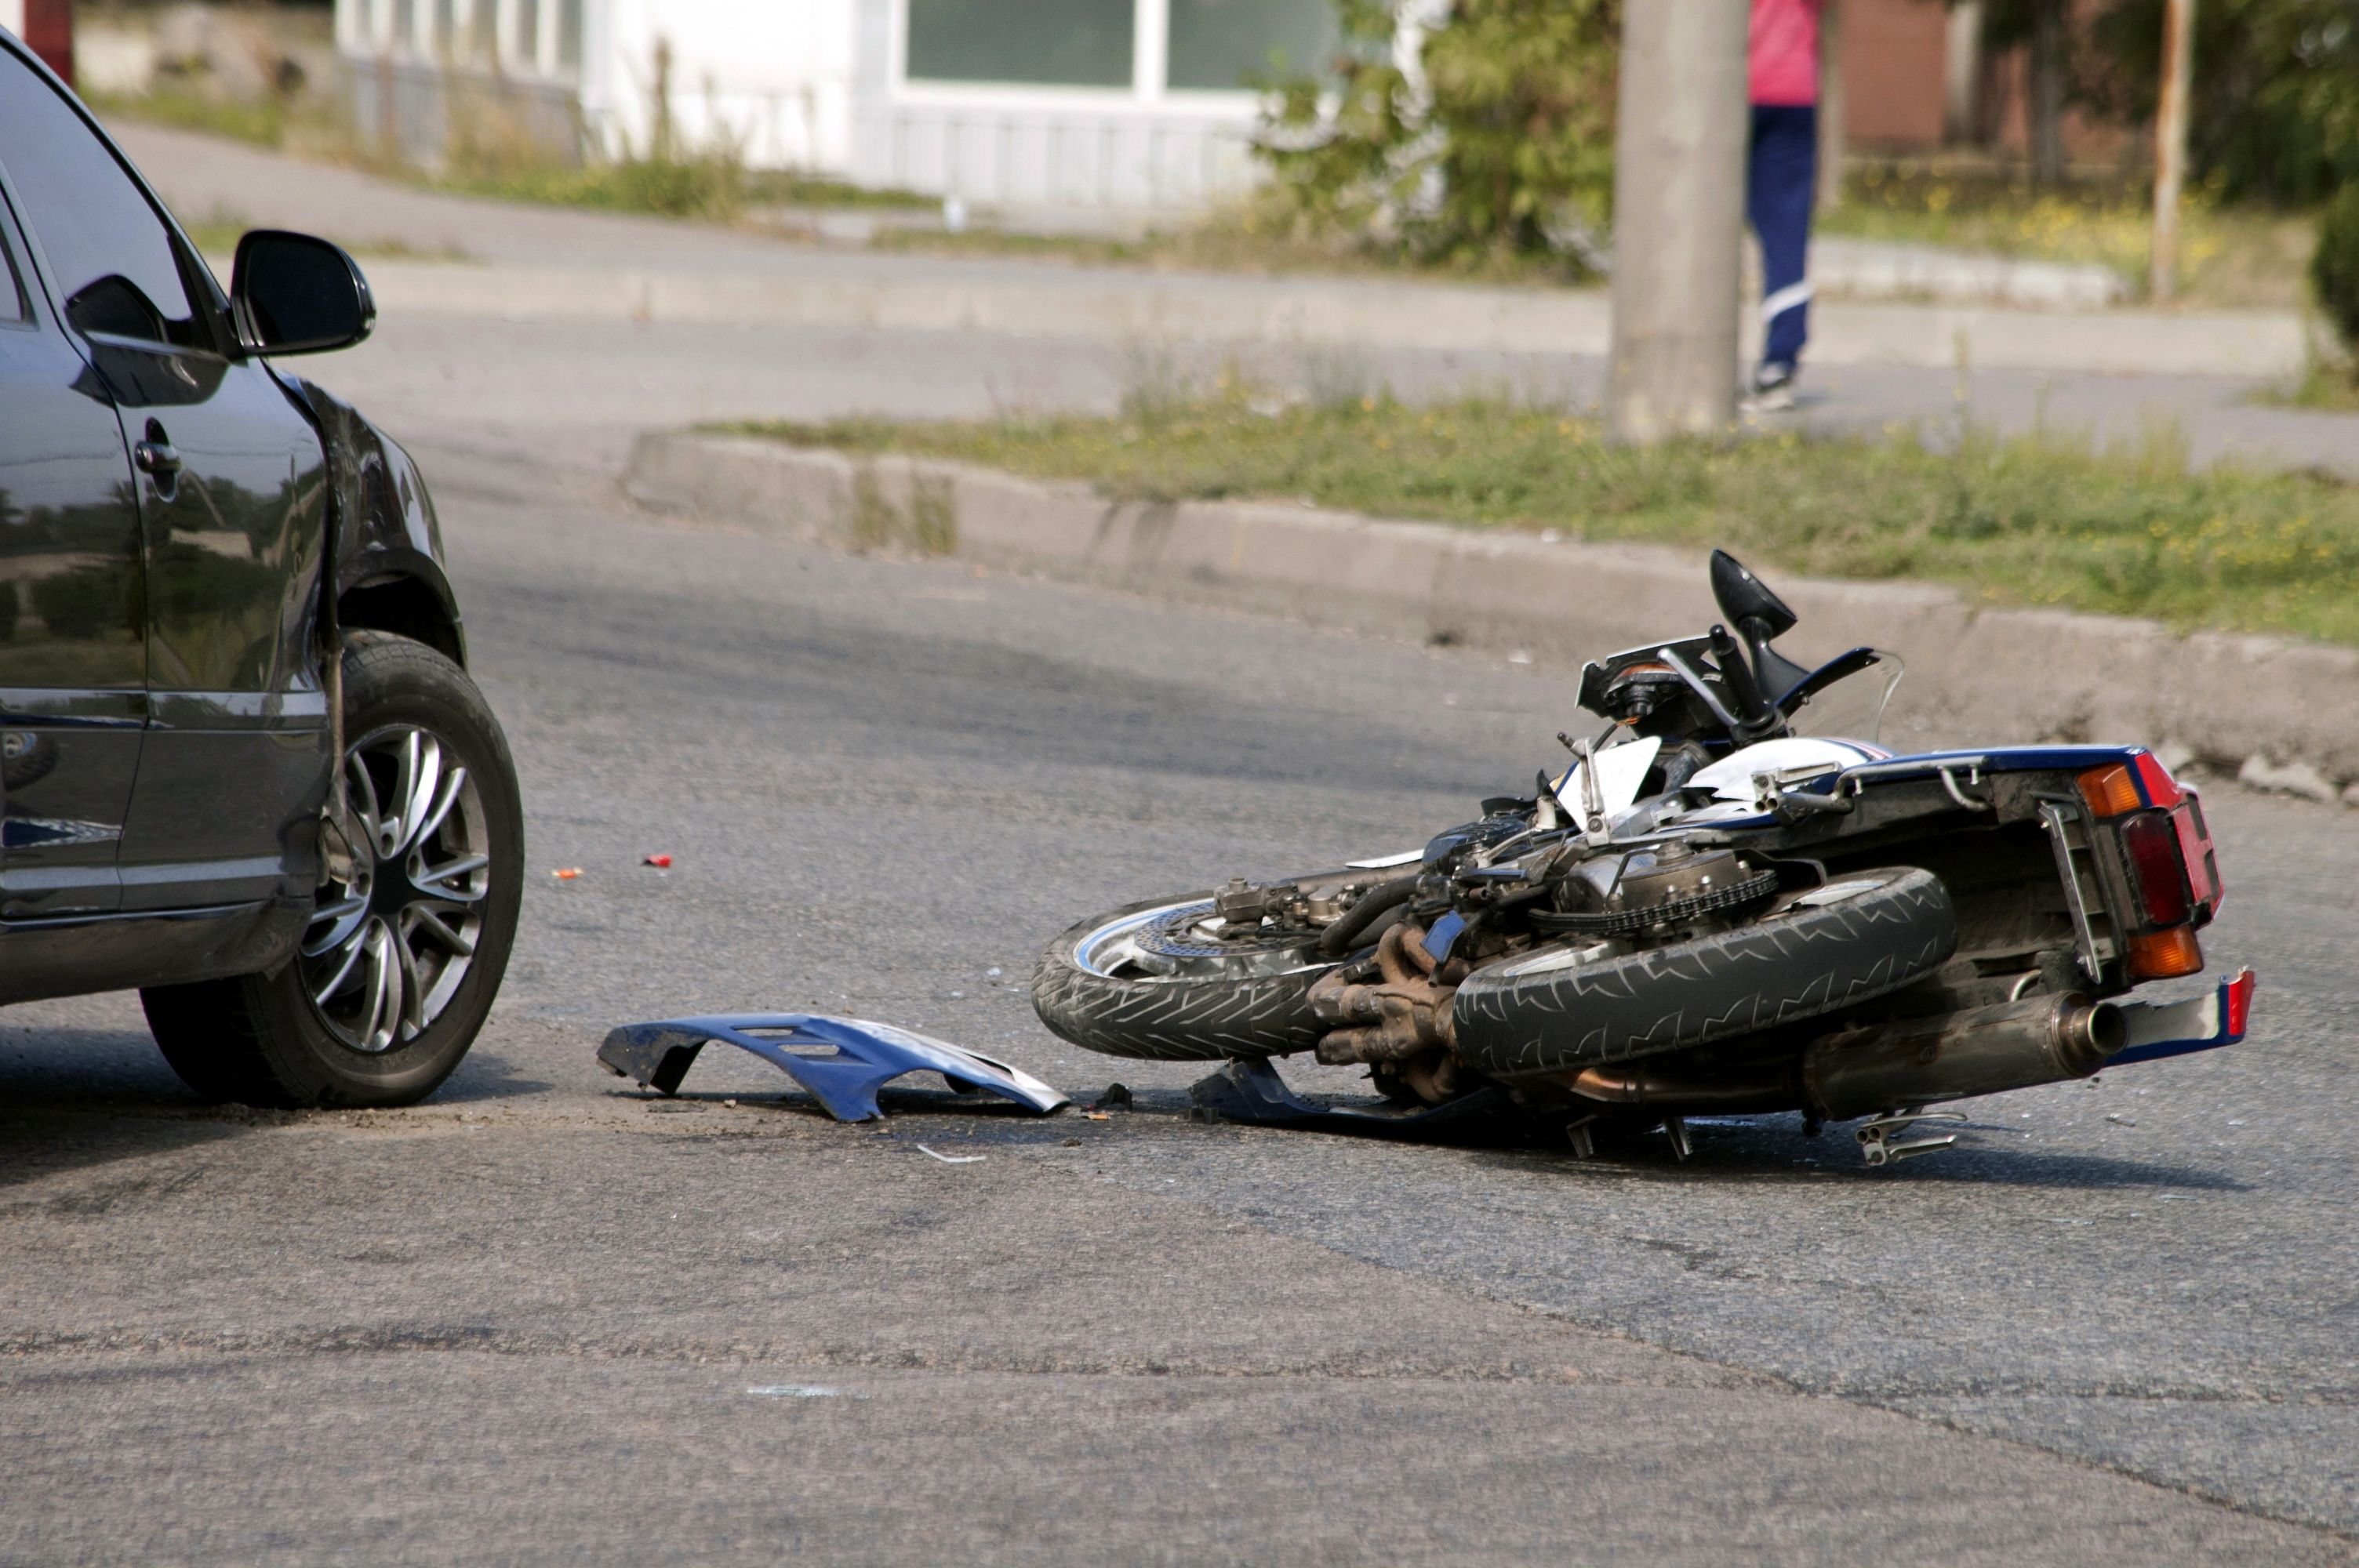 Your Trusted Wisconsin Motorcycle Accident Attorney